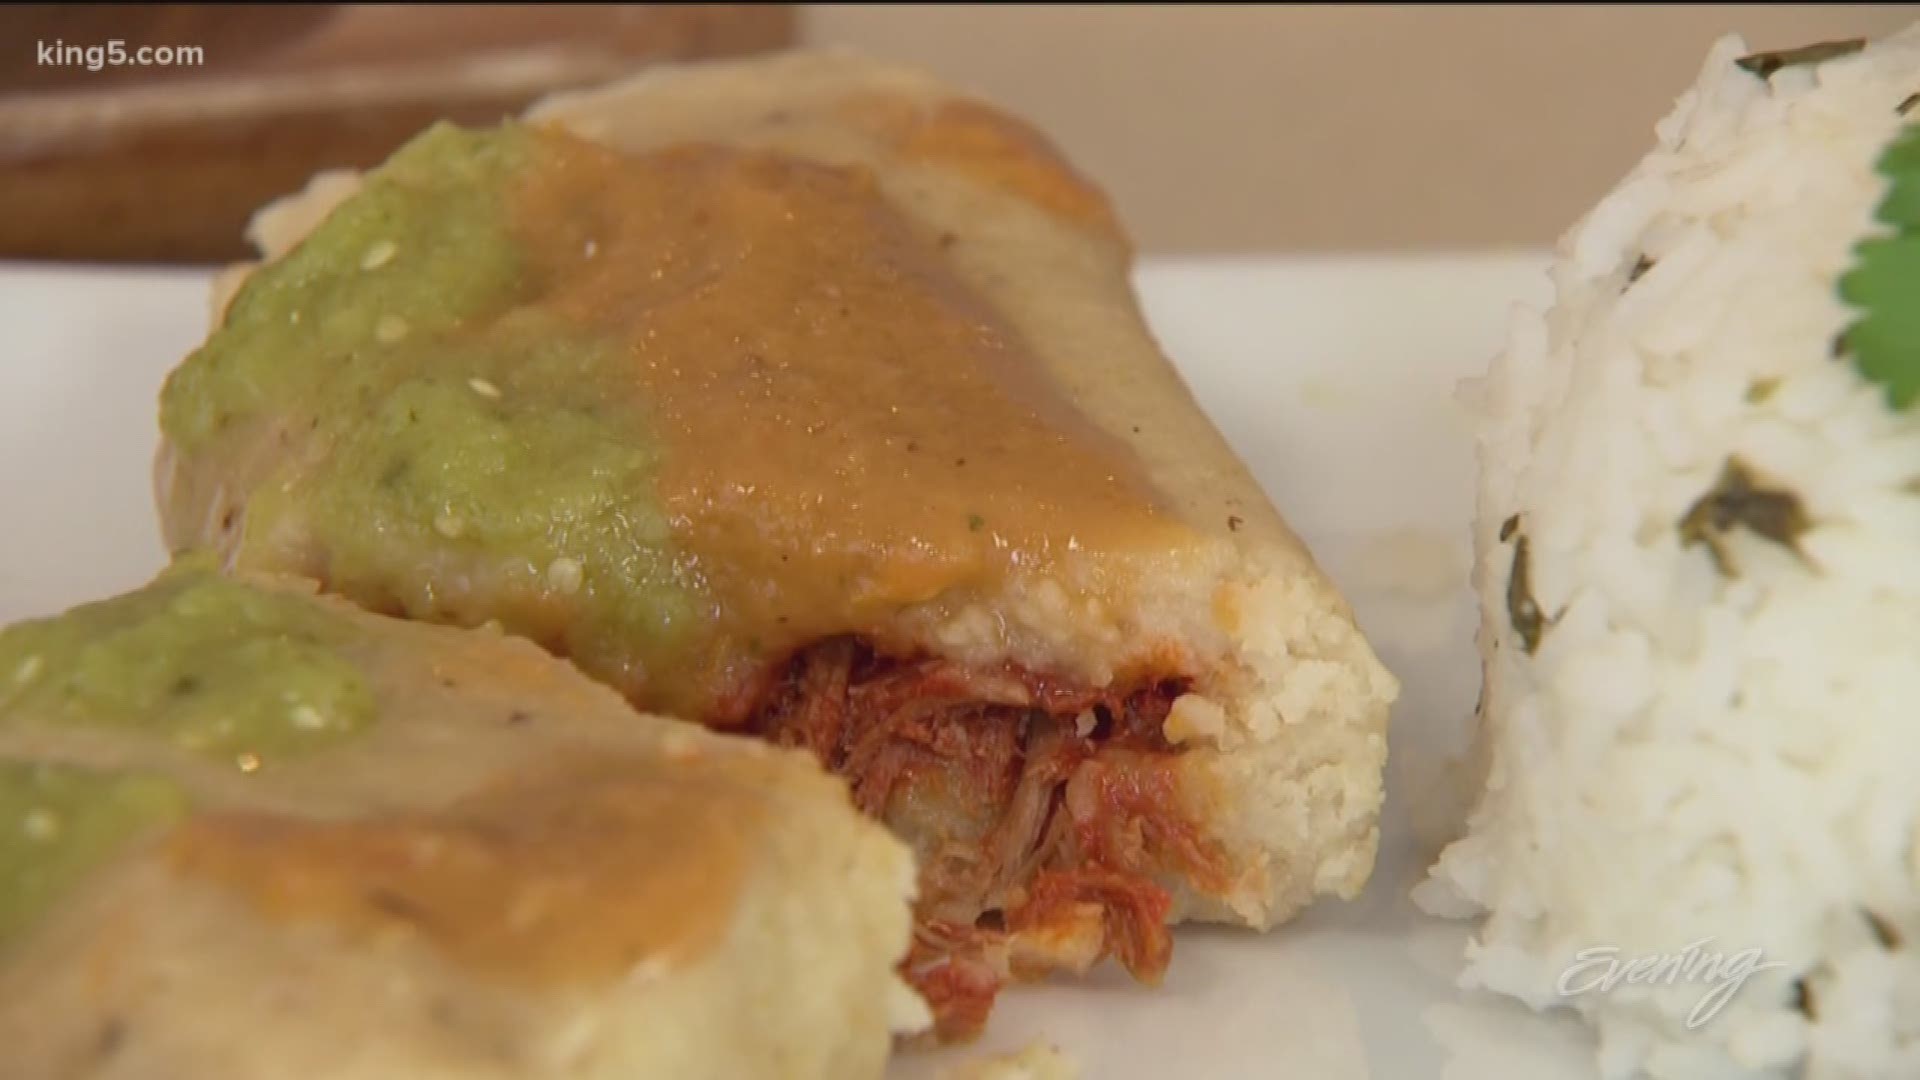 A & A Café and Tamaleria specializes in both savory and sweet handmade tamales